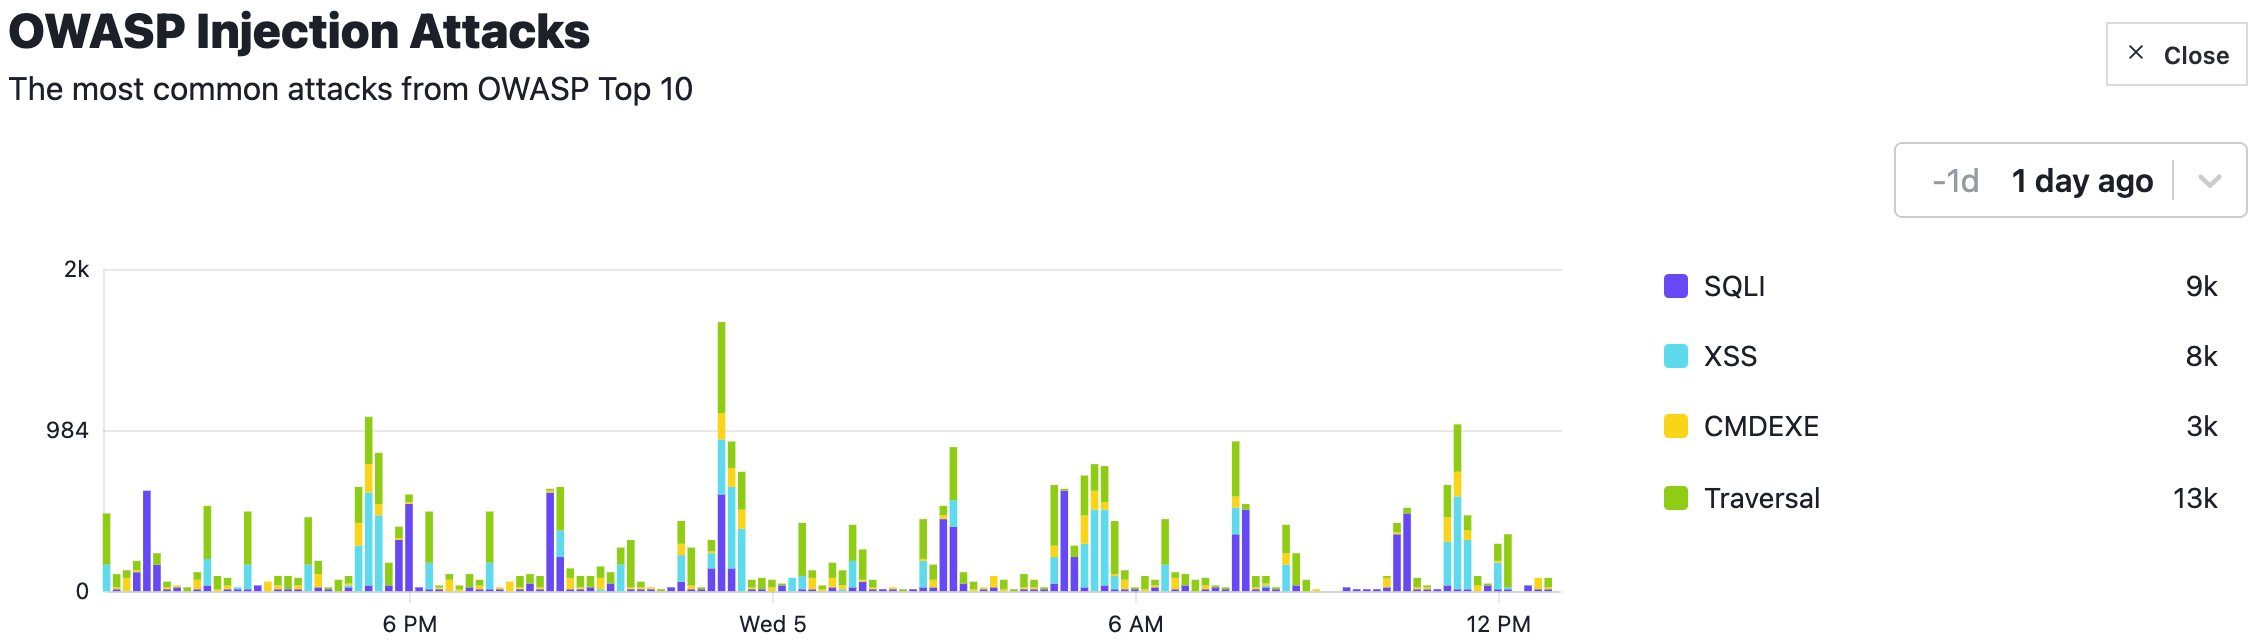 An example graph showing the number of injection attacks received over the last 24 hours, broken up by attack type.